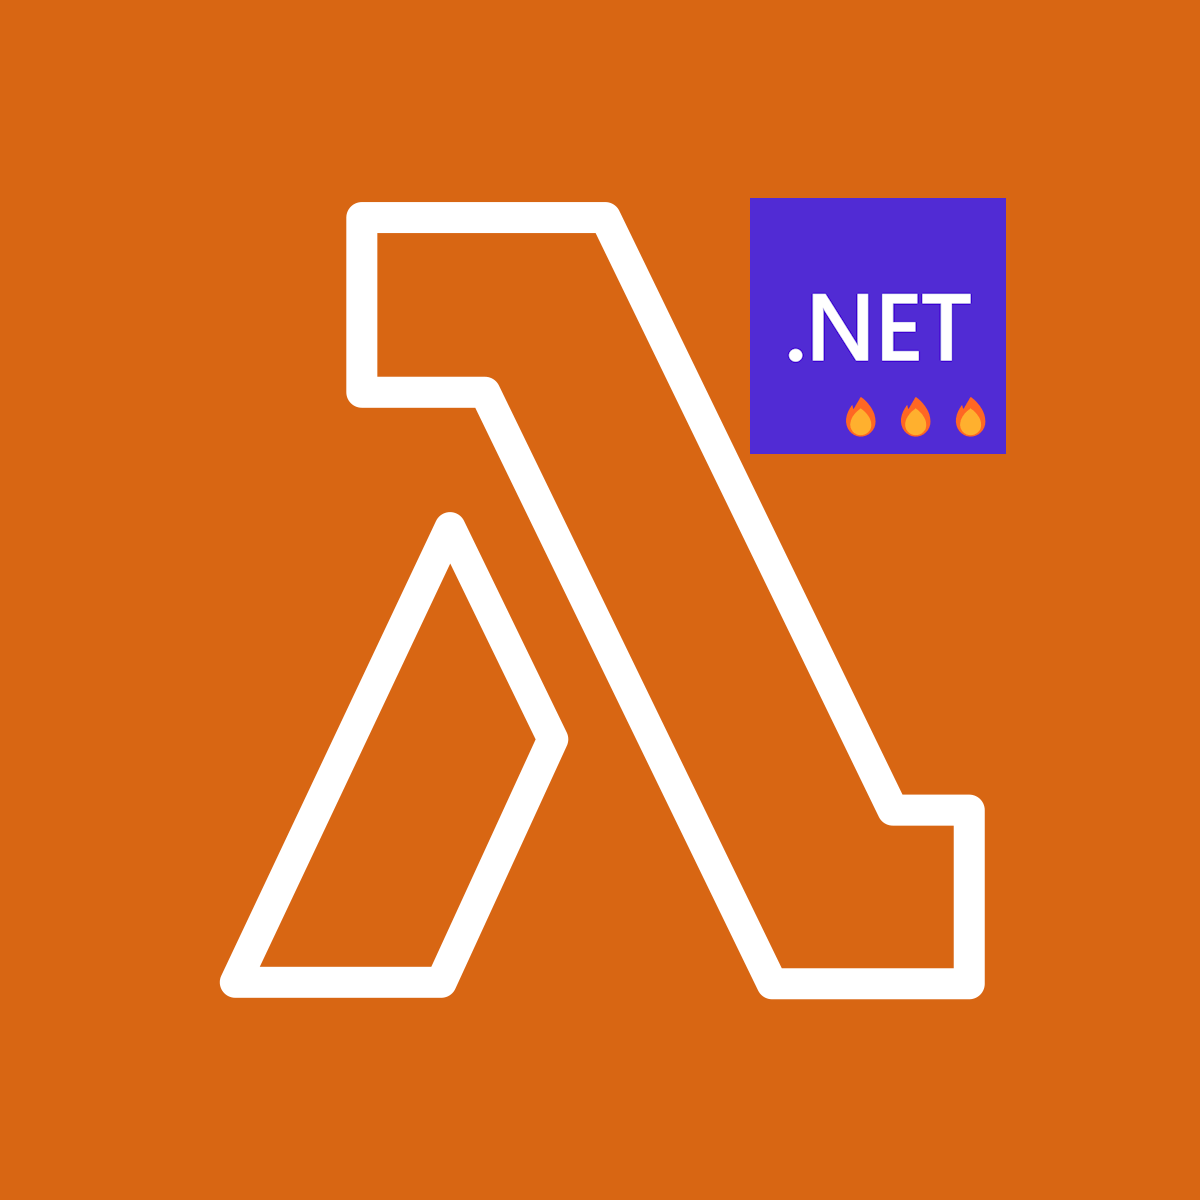 The AWS Lambda logo overlaid with the .NET logo wth some fire emojis added